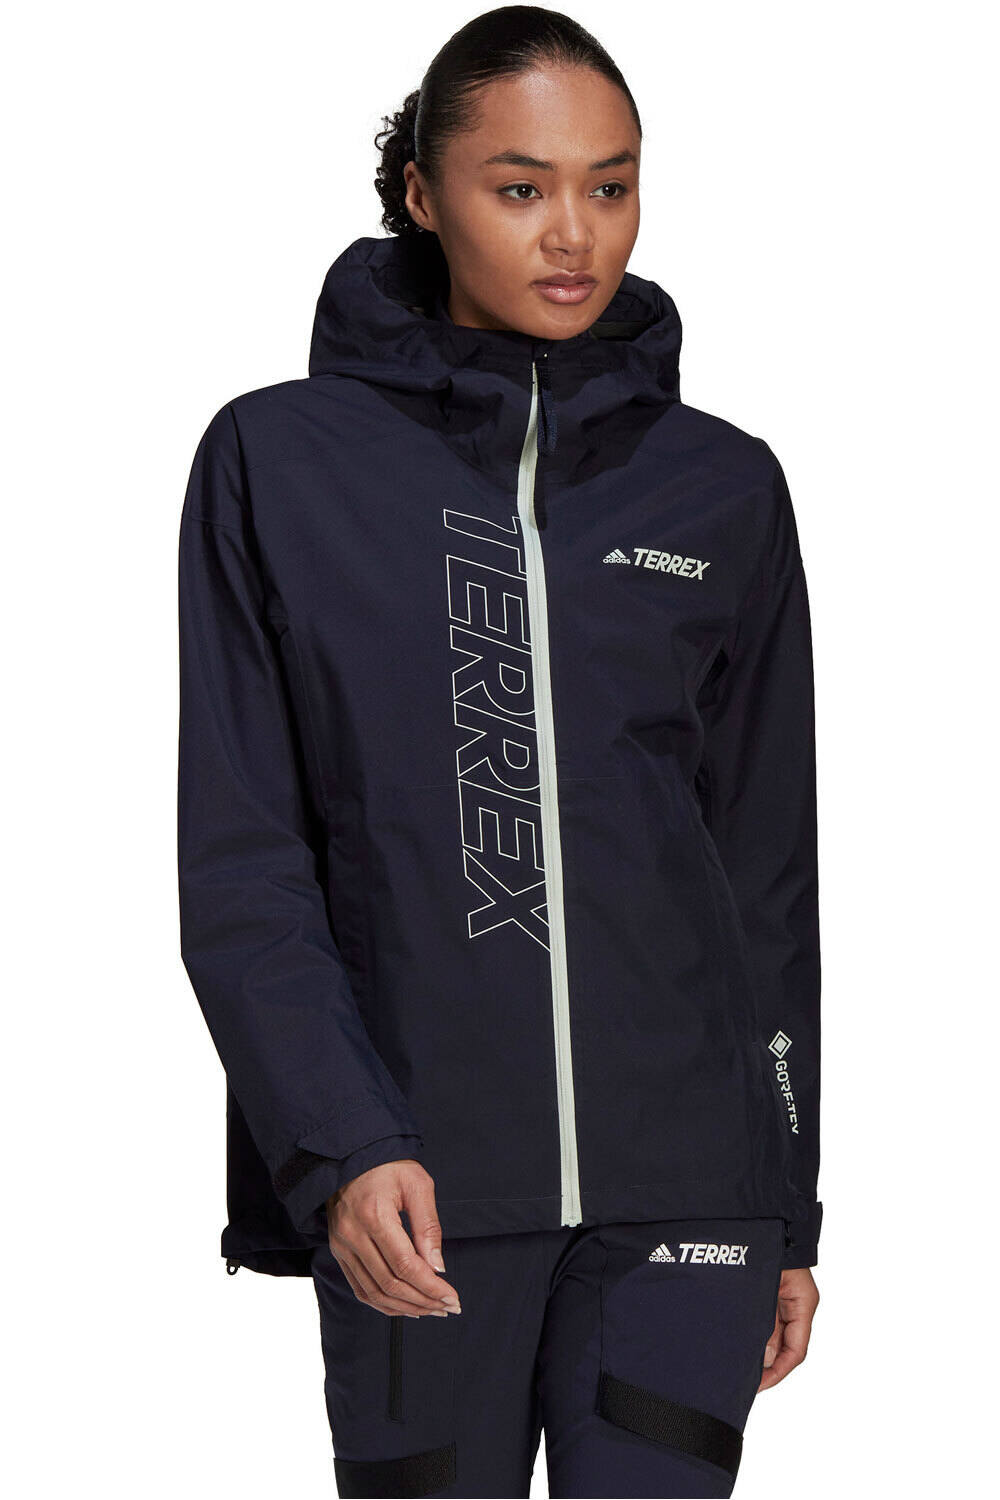 adidas chaqueta impermeable mujer Terrex GORE-TEX Paclite impermeable vista frontal